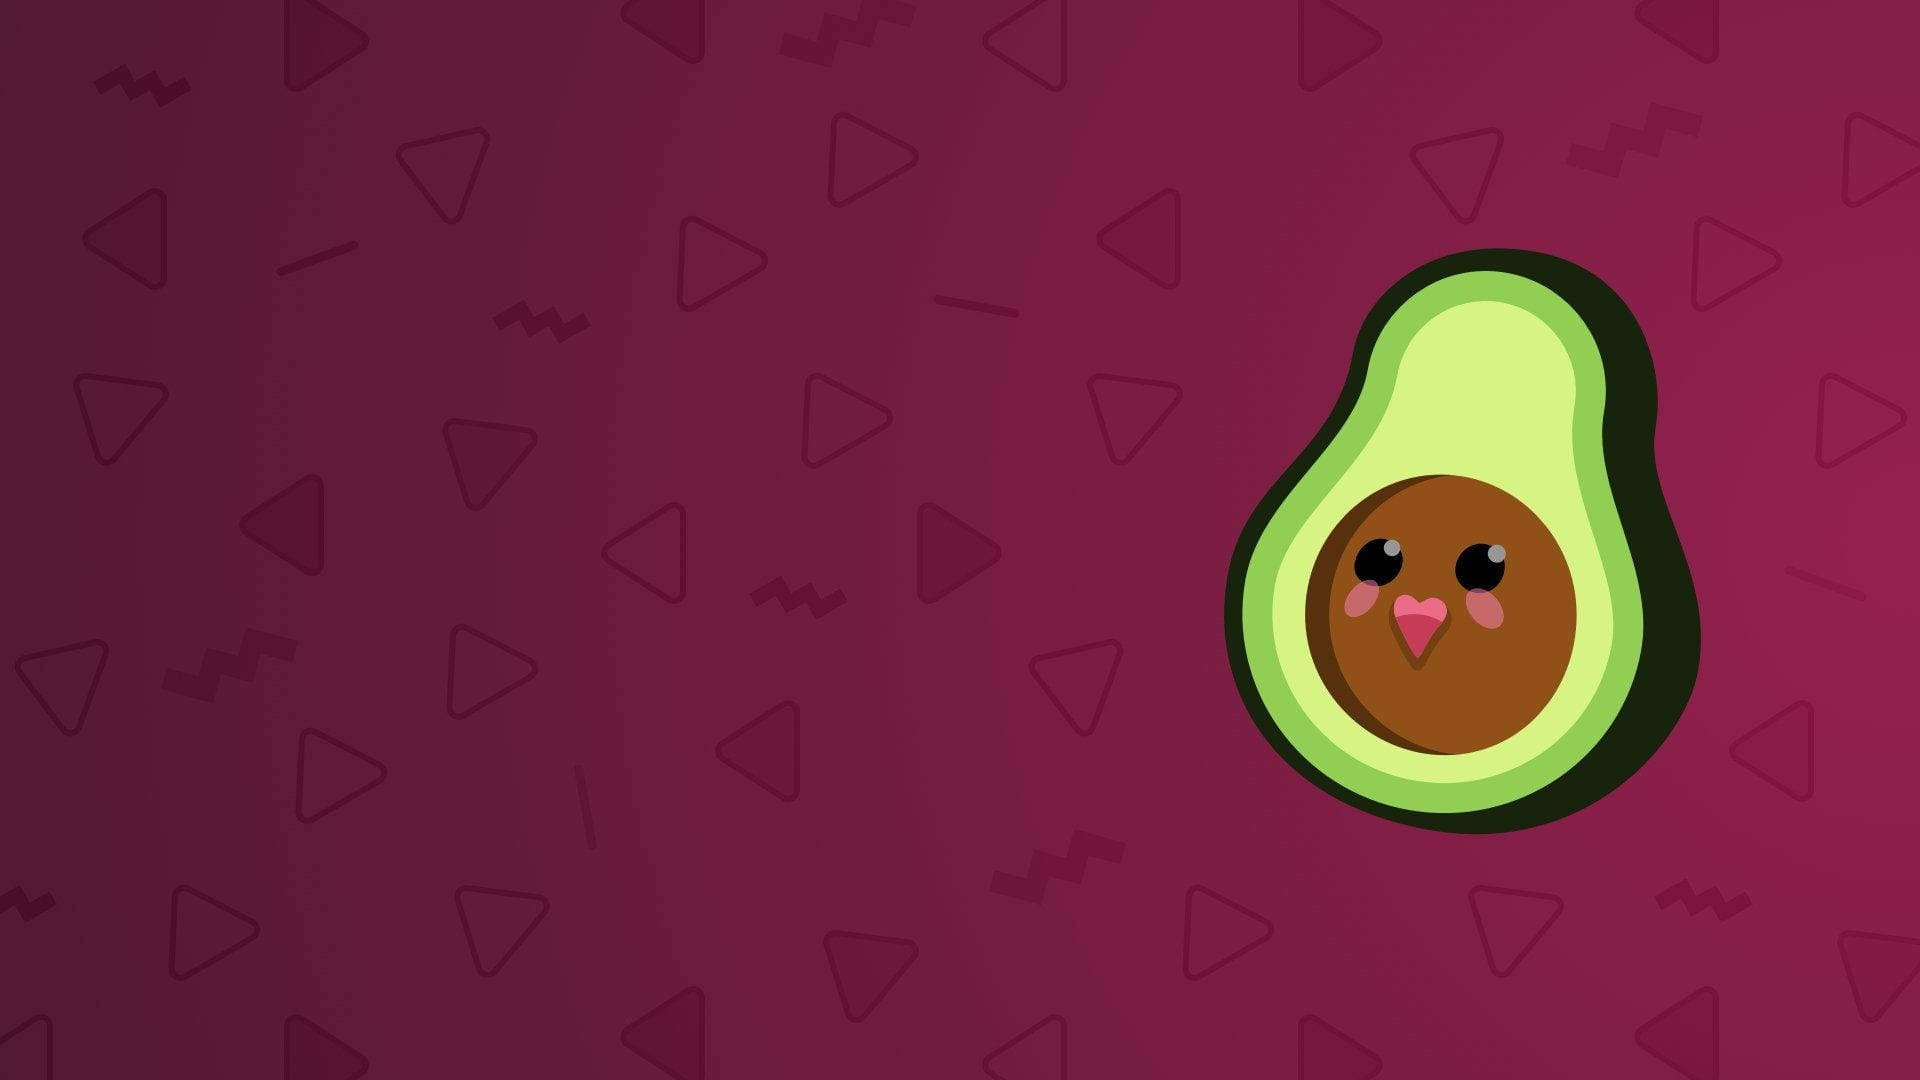 Avocado wallpaper by LGM13  Download on ZEDGE  4640